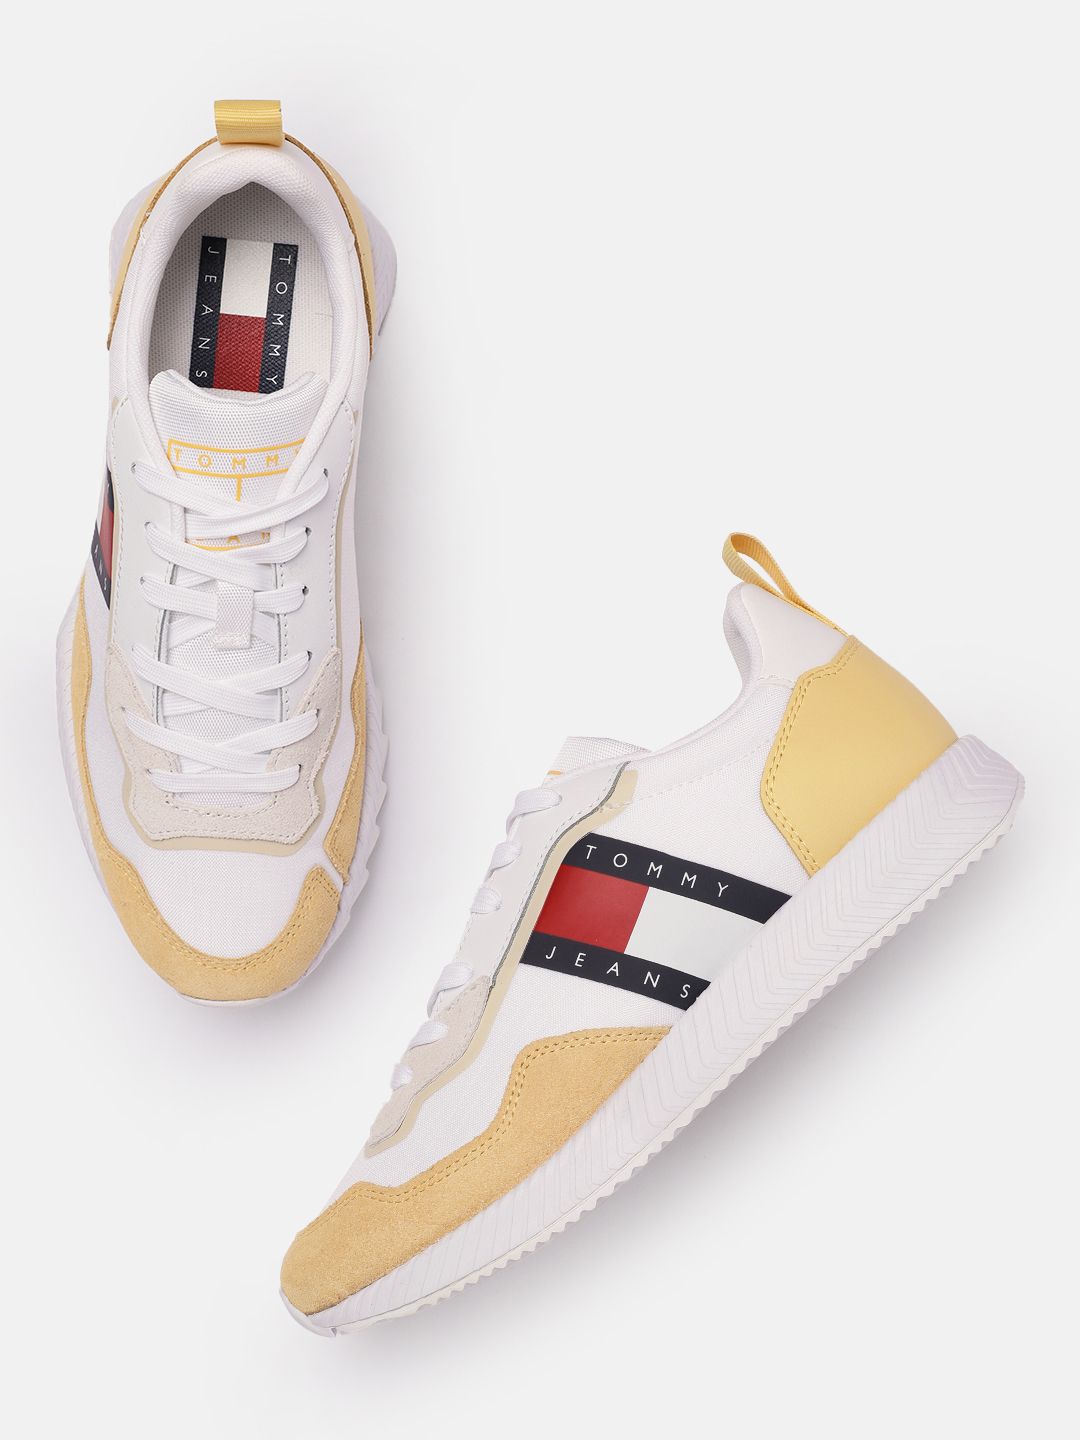 Tommy Hilfiger Women White & Mustard Yellow Solid Regular Sneakers Price in India